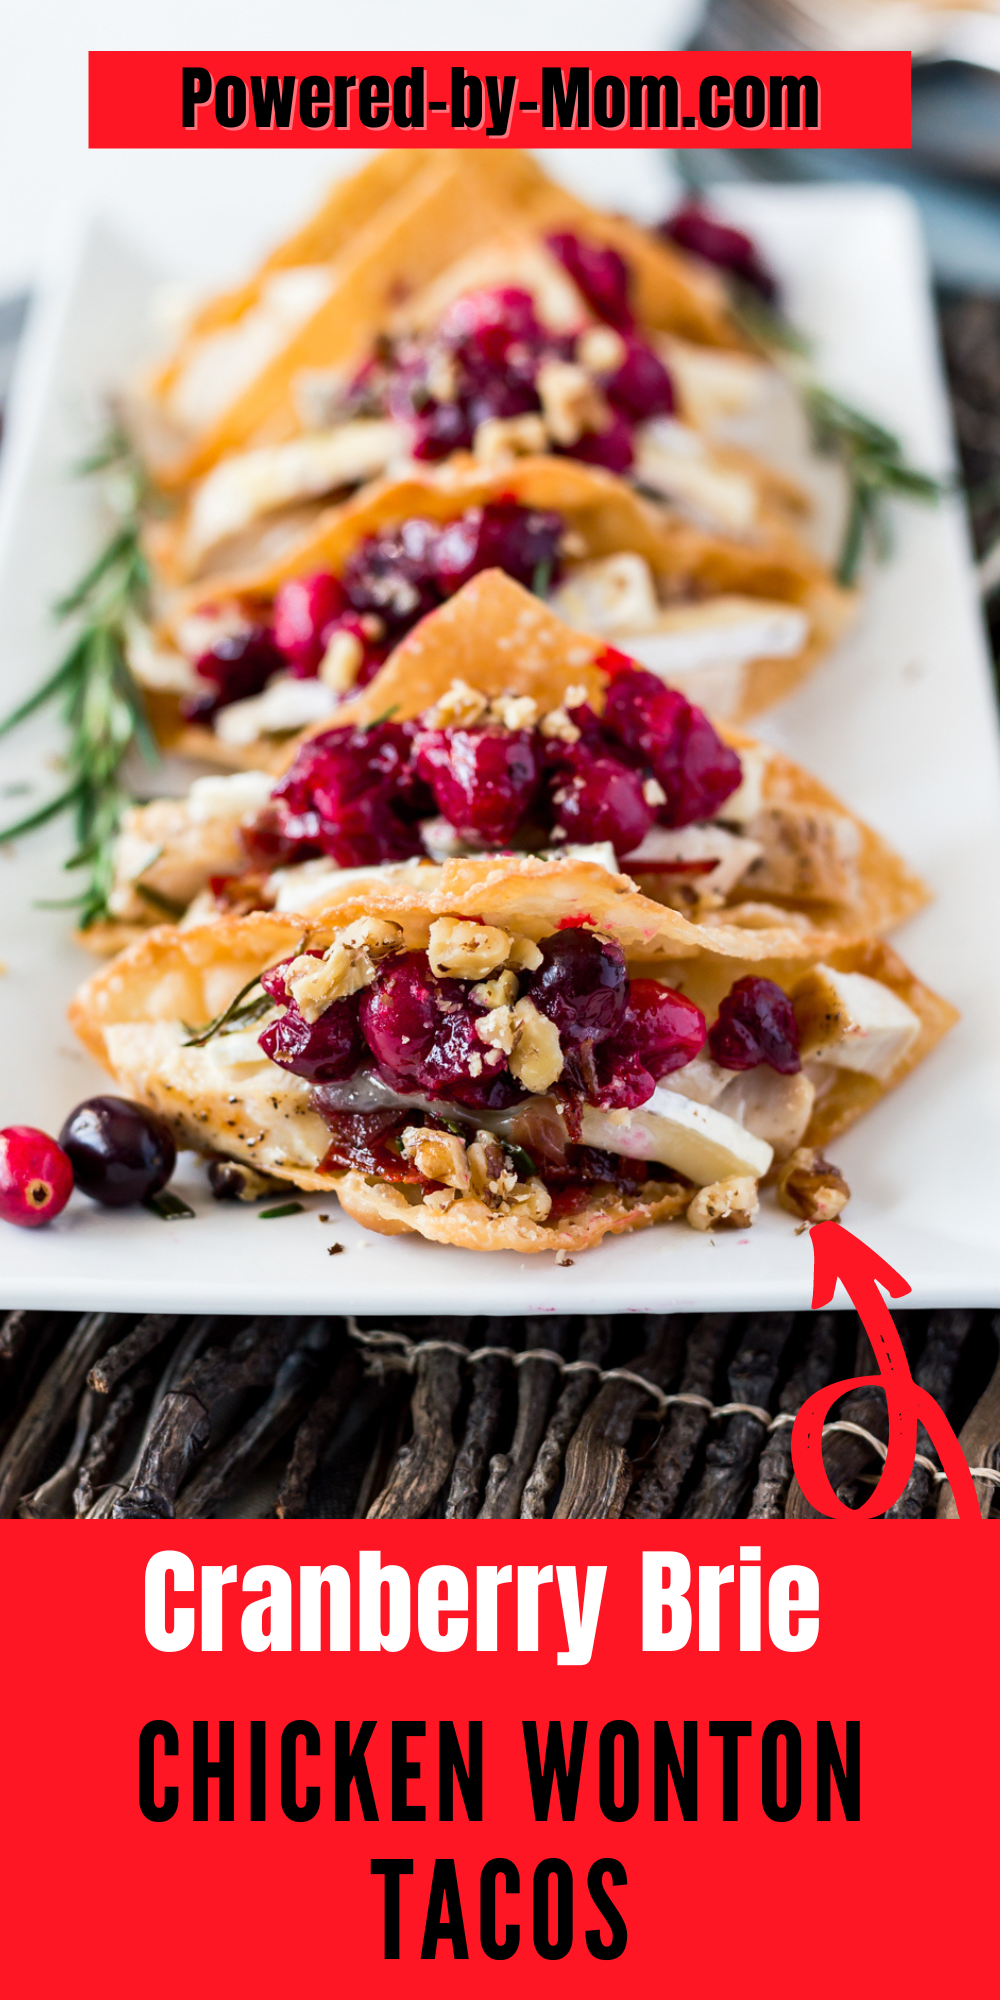 Festive and Tasty Cranberry Brie Chicken Wonton Tacos are a fabulous holiday appetizer. They are a treat for your tastebuds. Find out how to make them now. 